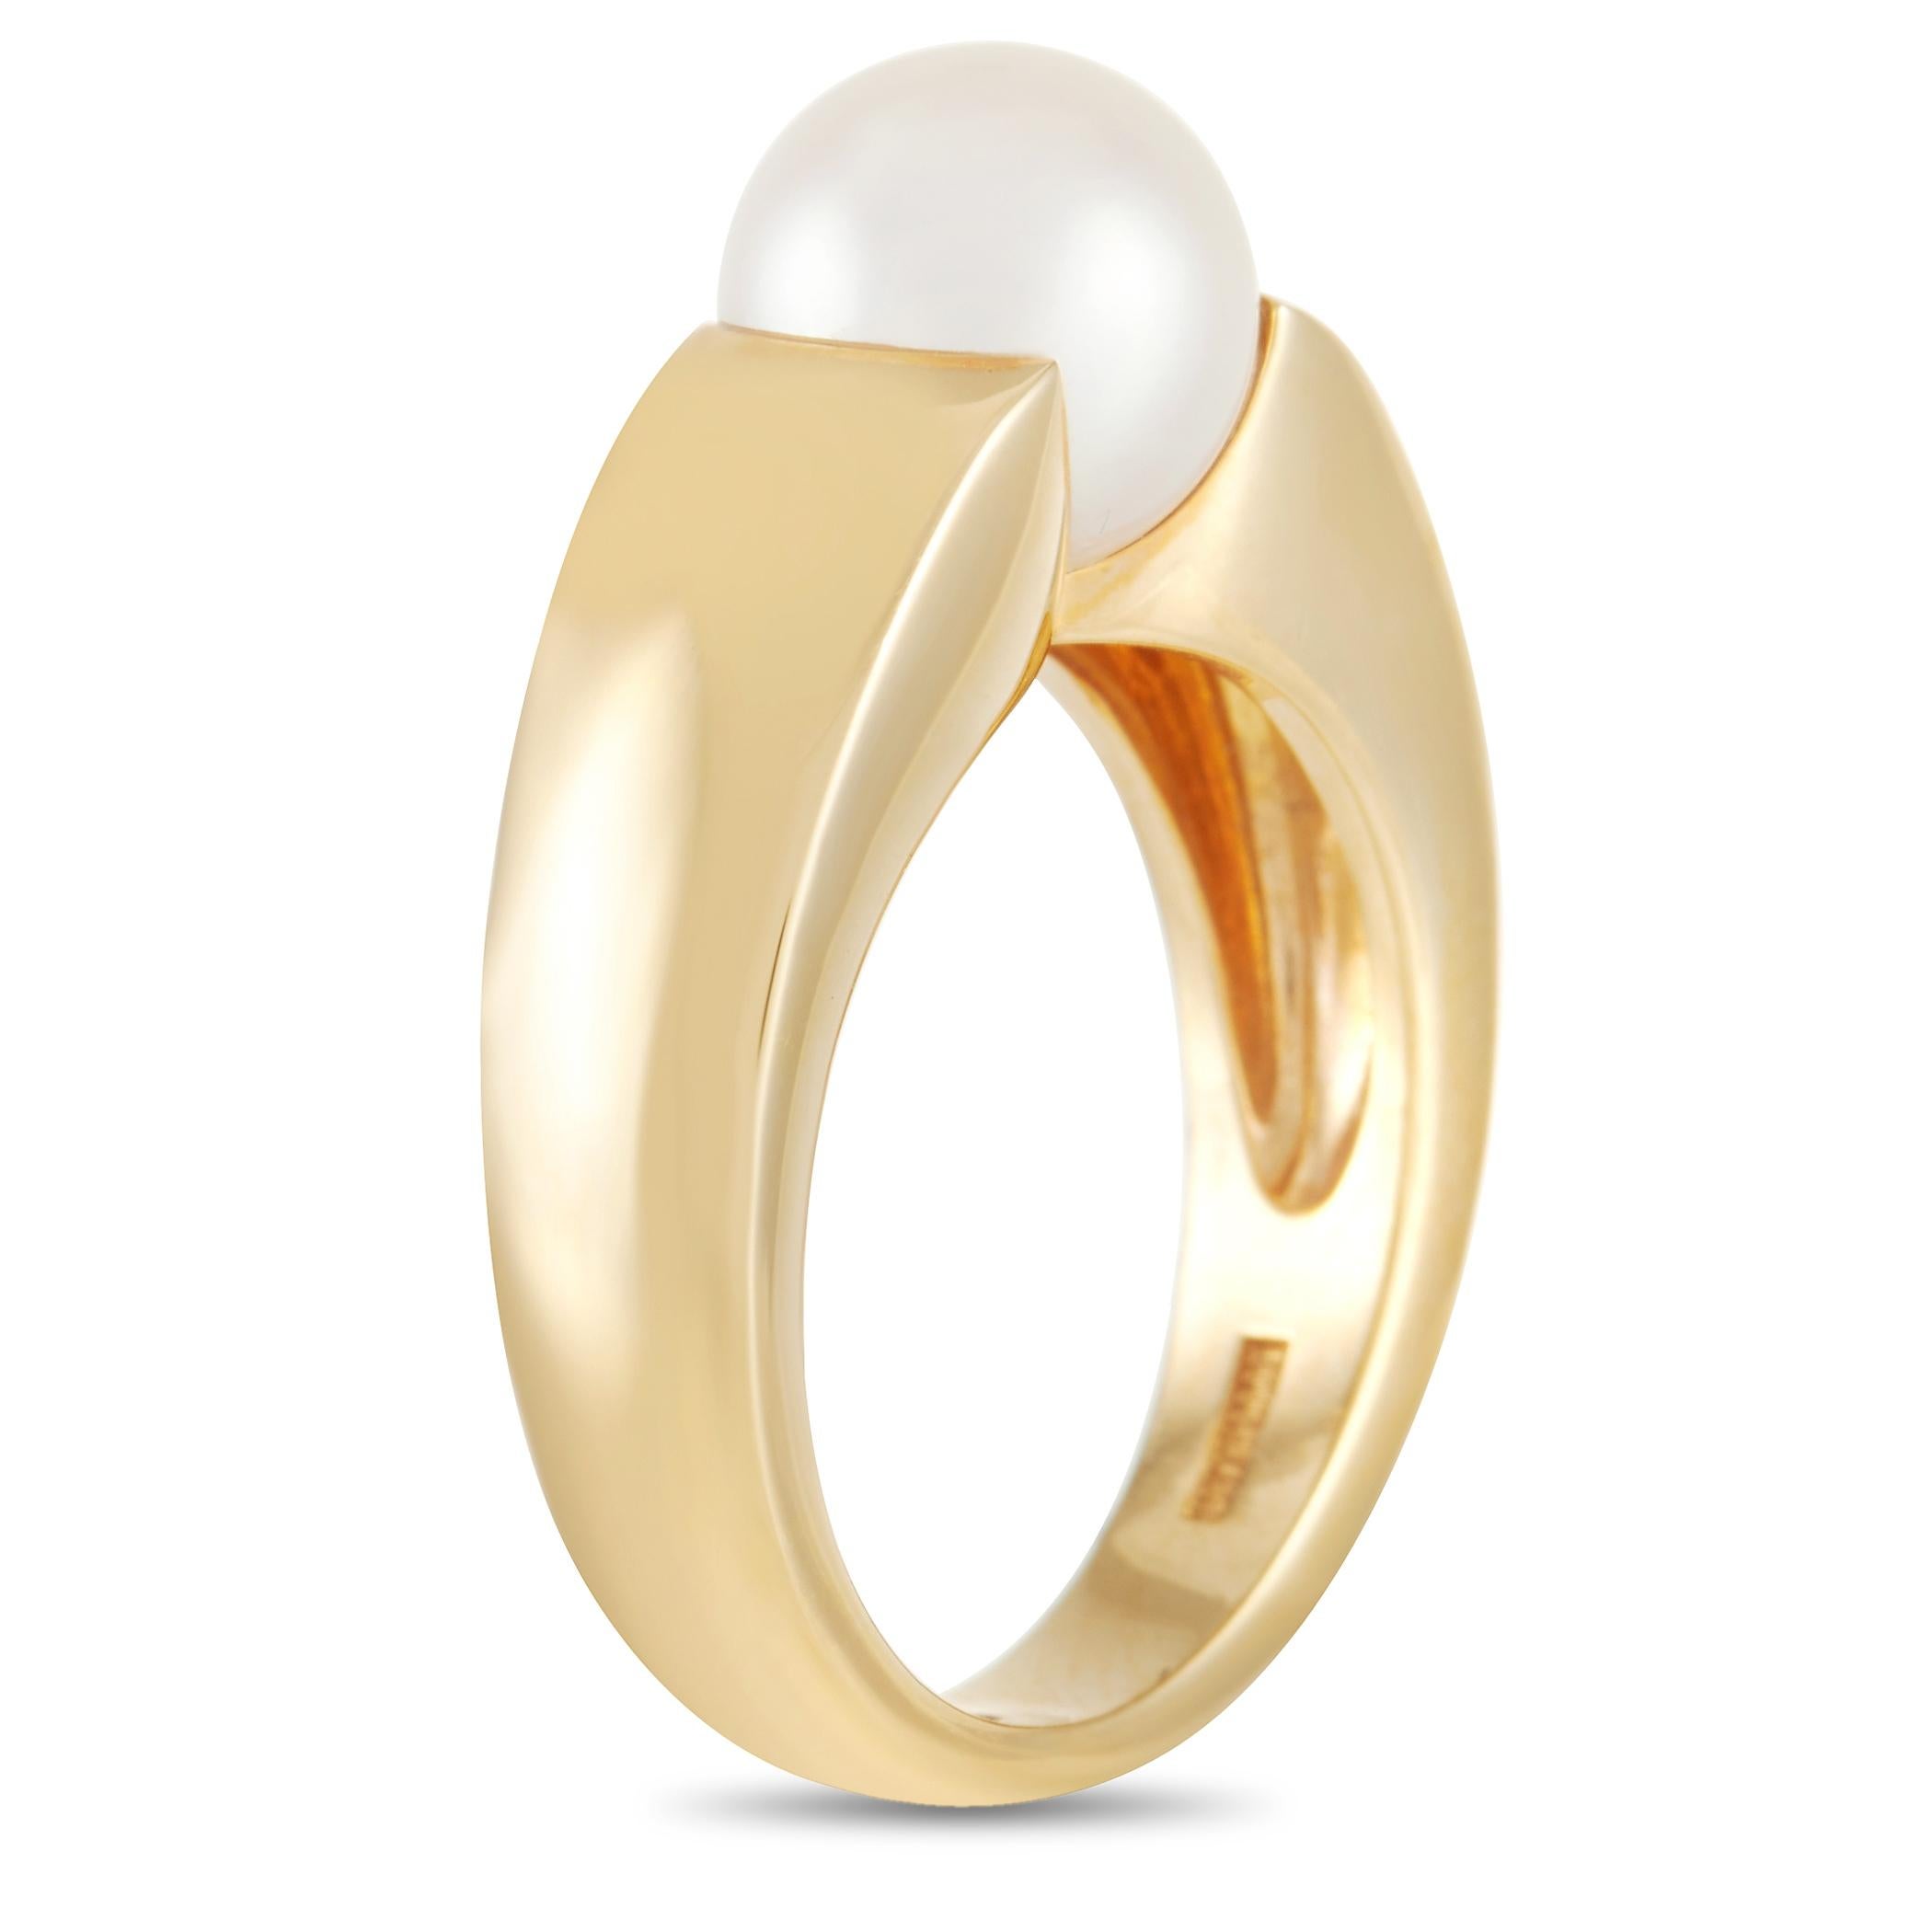 Simple and elegant in design, this luxurious ring from Boucheron is truly timeless. Suspended within the central opening of the 18K yellow gold band, you’ll find a captivating pearl measuring 8.5 mm. A 5 mm band width and a 9 mm top height make this